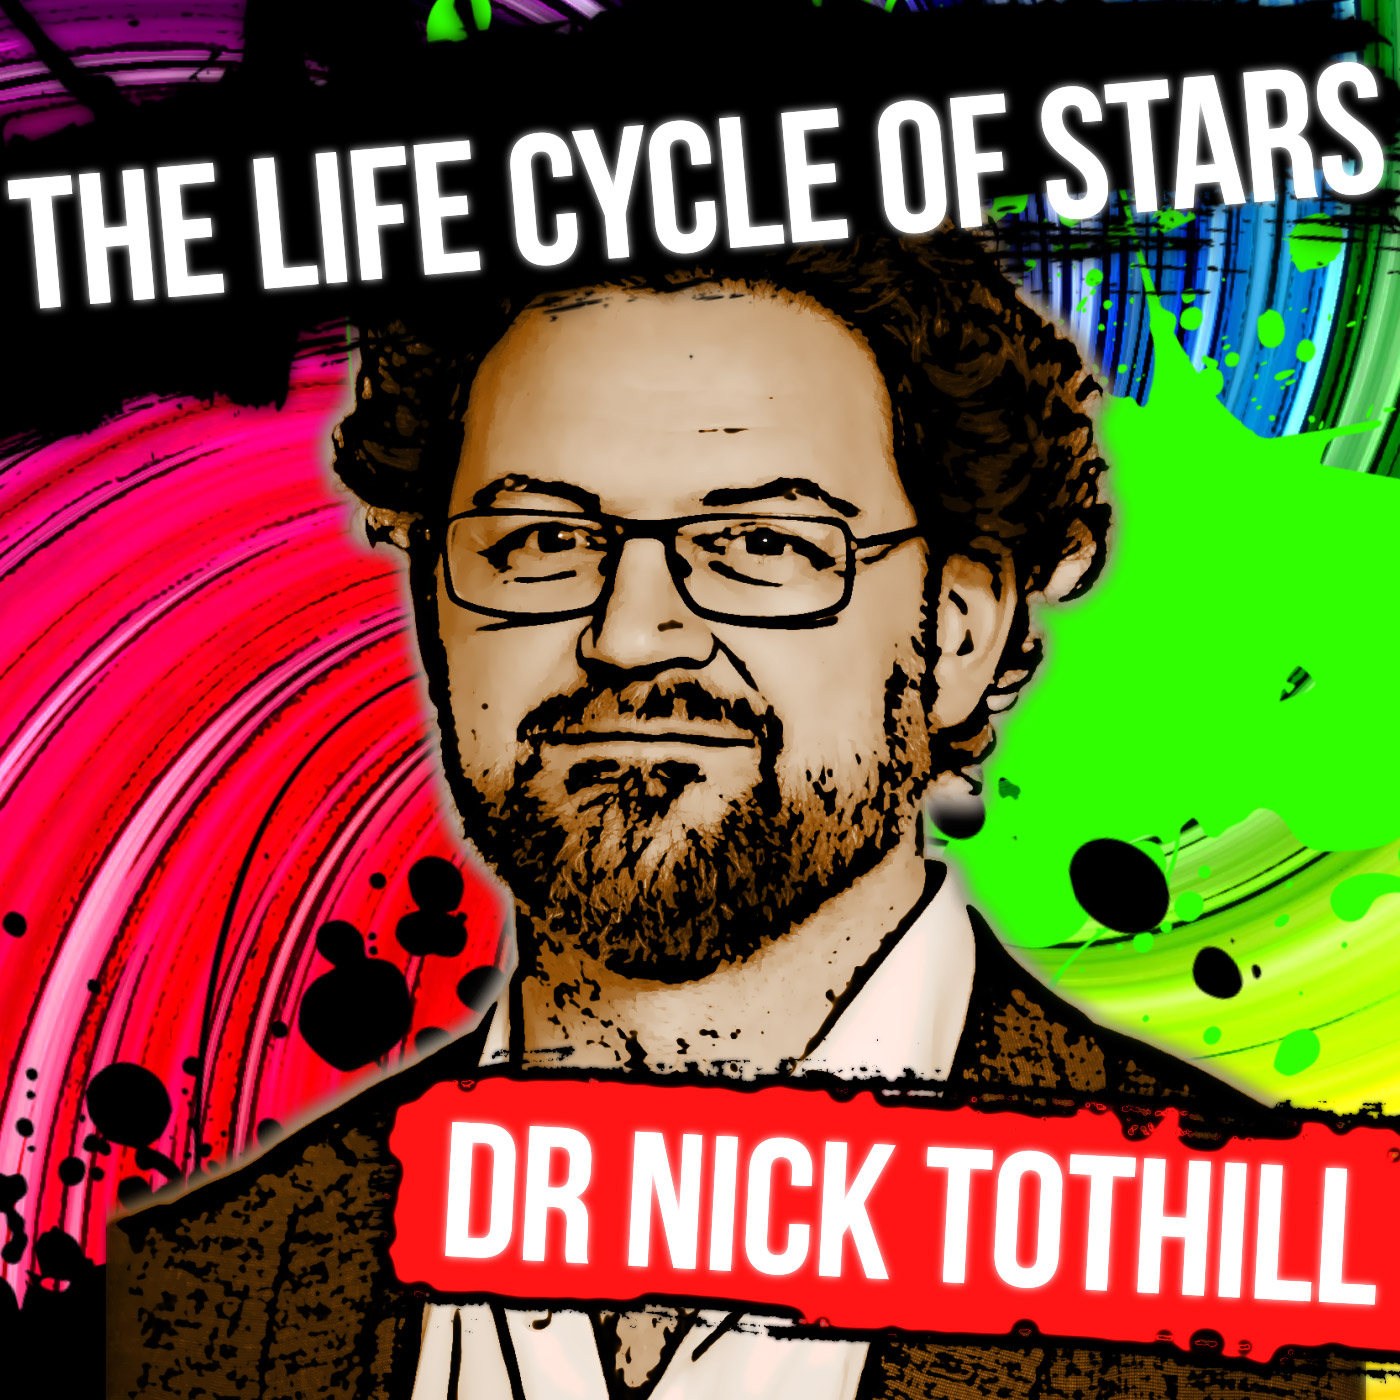 4.5 The lifecycle of stars with Dr Nick Tothill